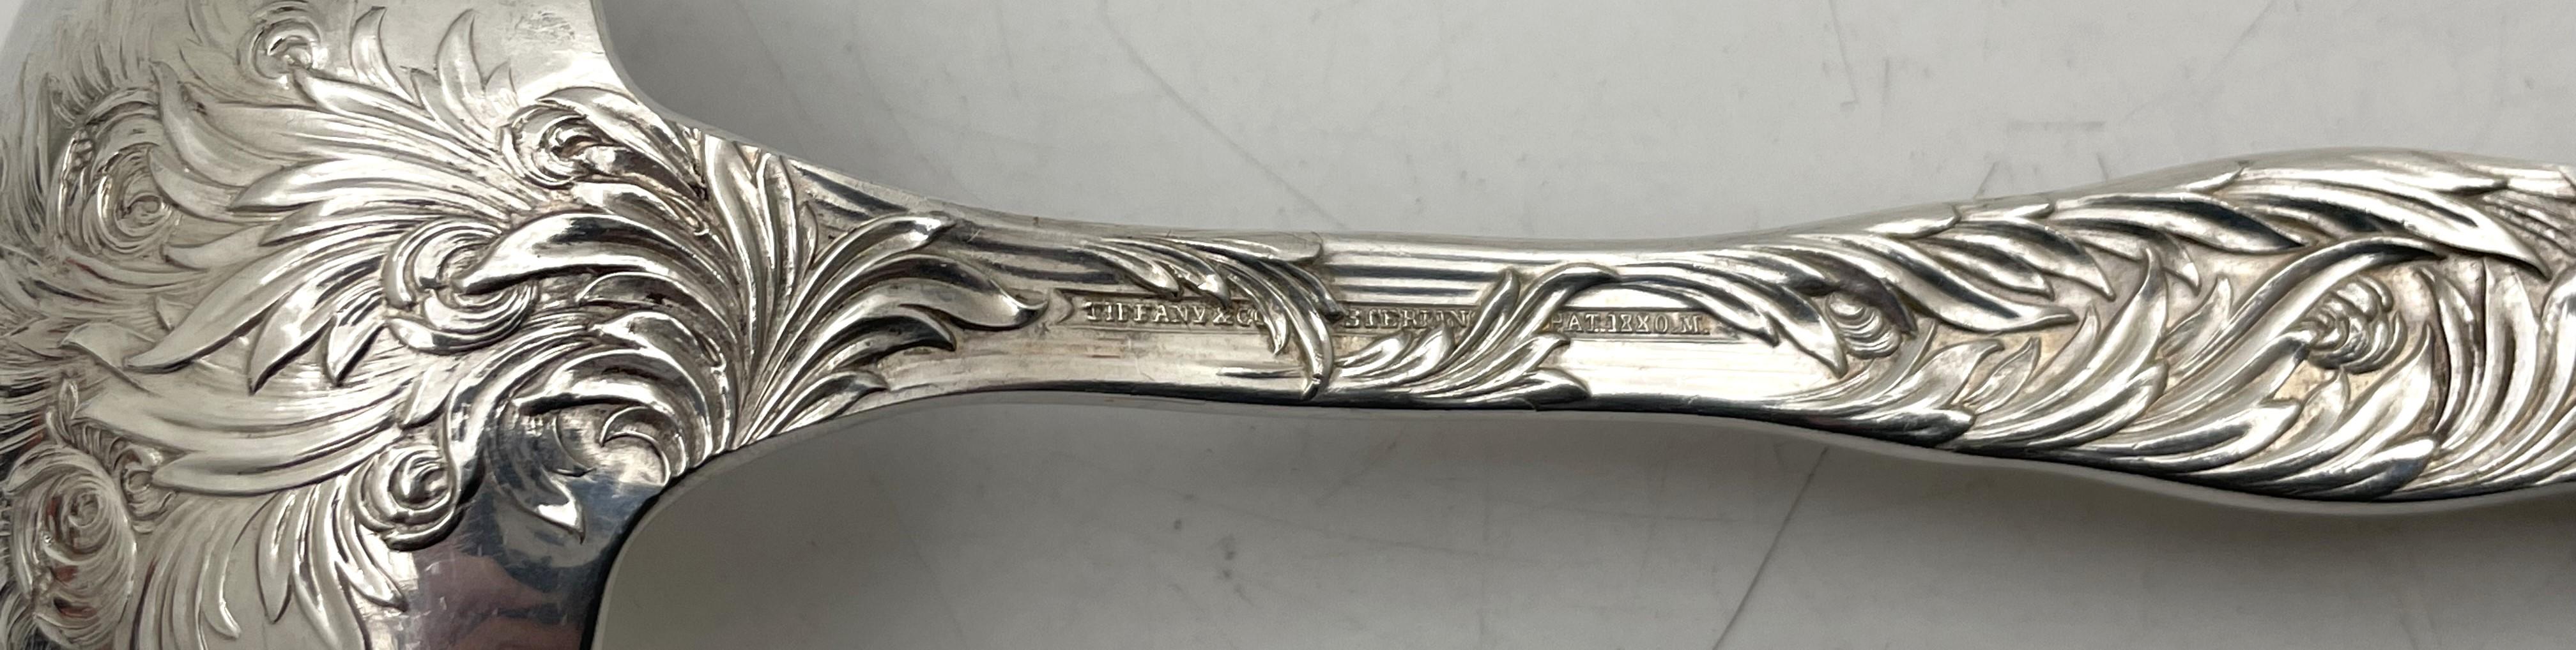 19th Century Tiffany & Co. Sterling Silver Chrysanthemum Gravy Ladle For Sale